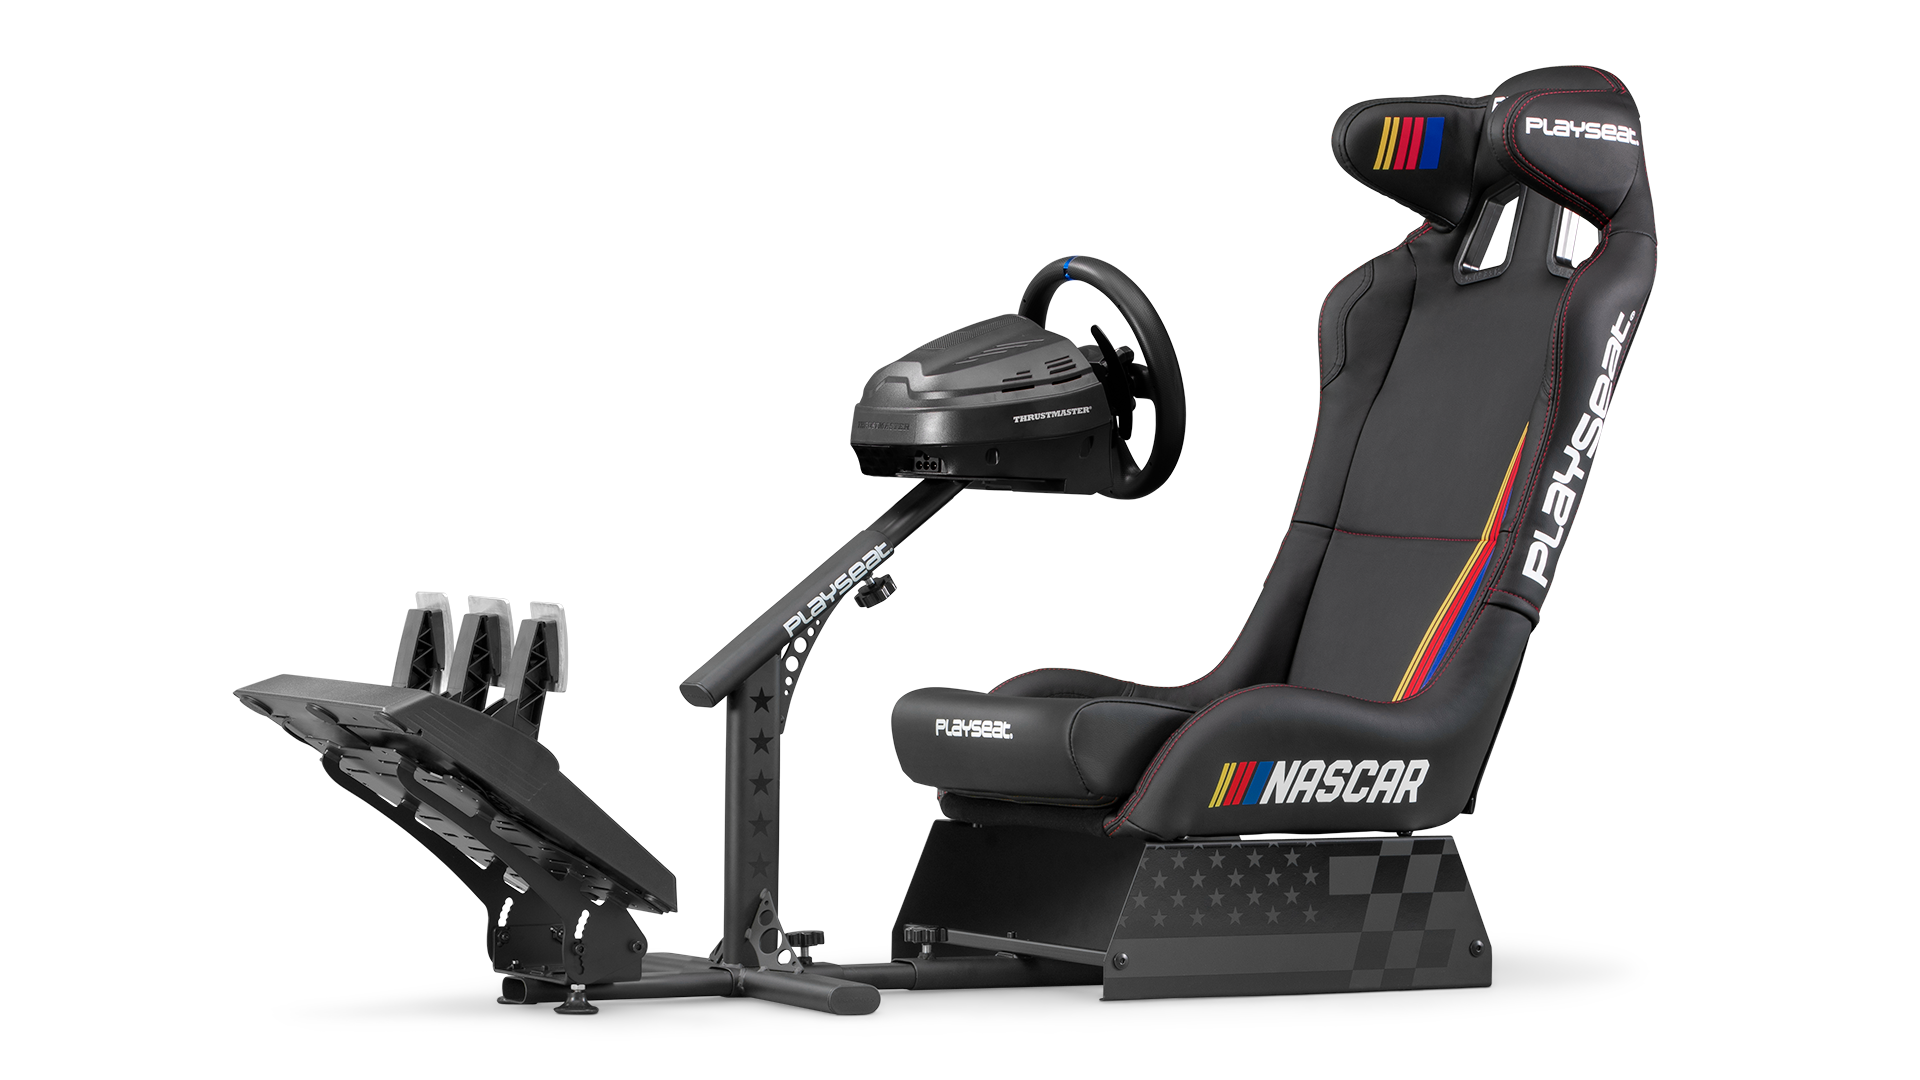 playseat-evolution-pro-nascar-racing-simulator-front-angle-view-thrustmaster-1920x1080.png